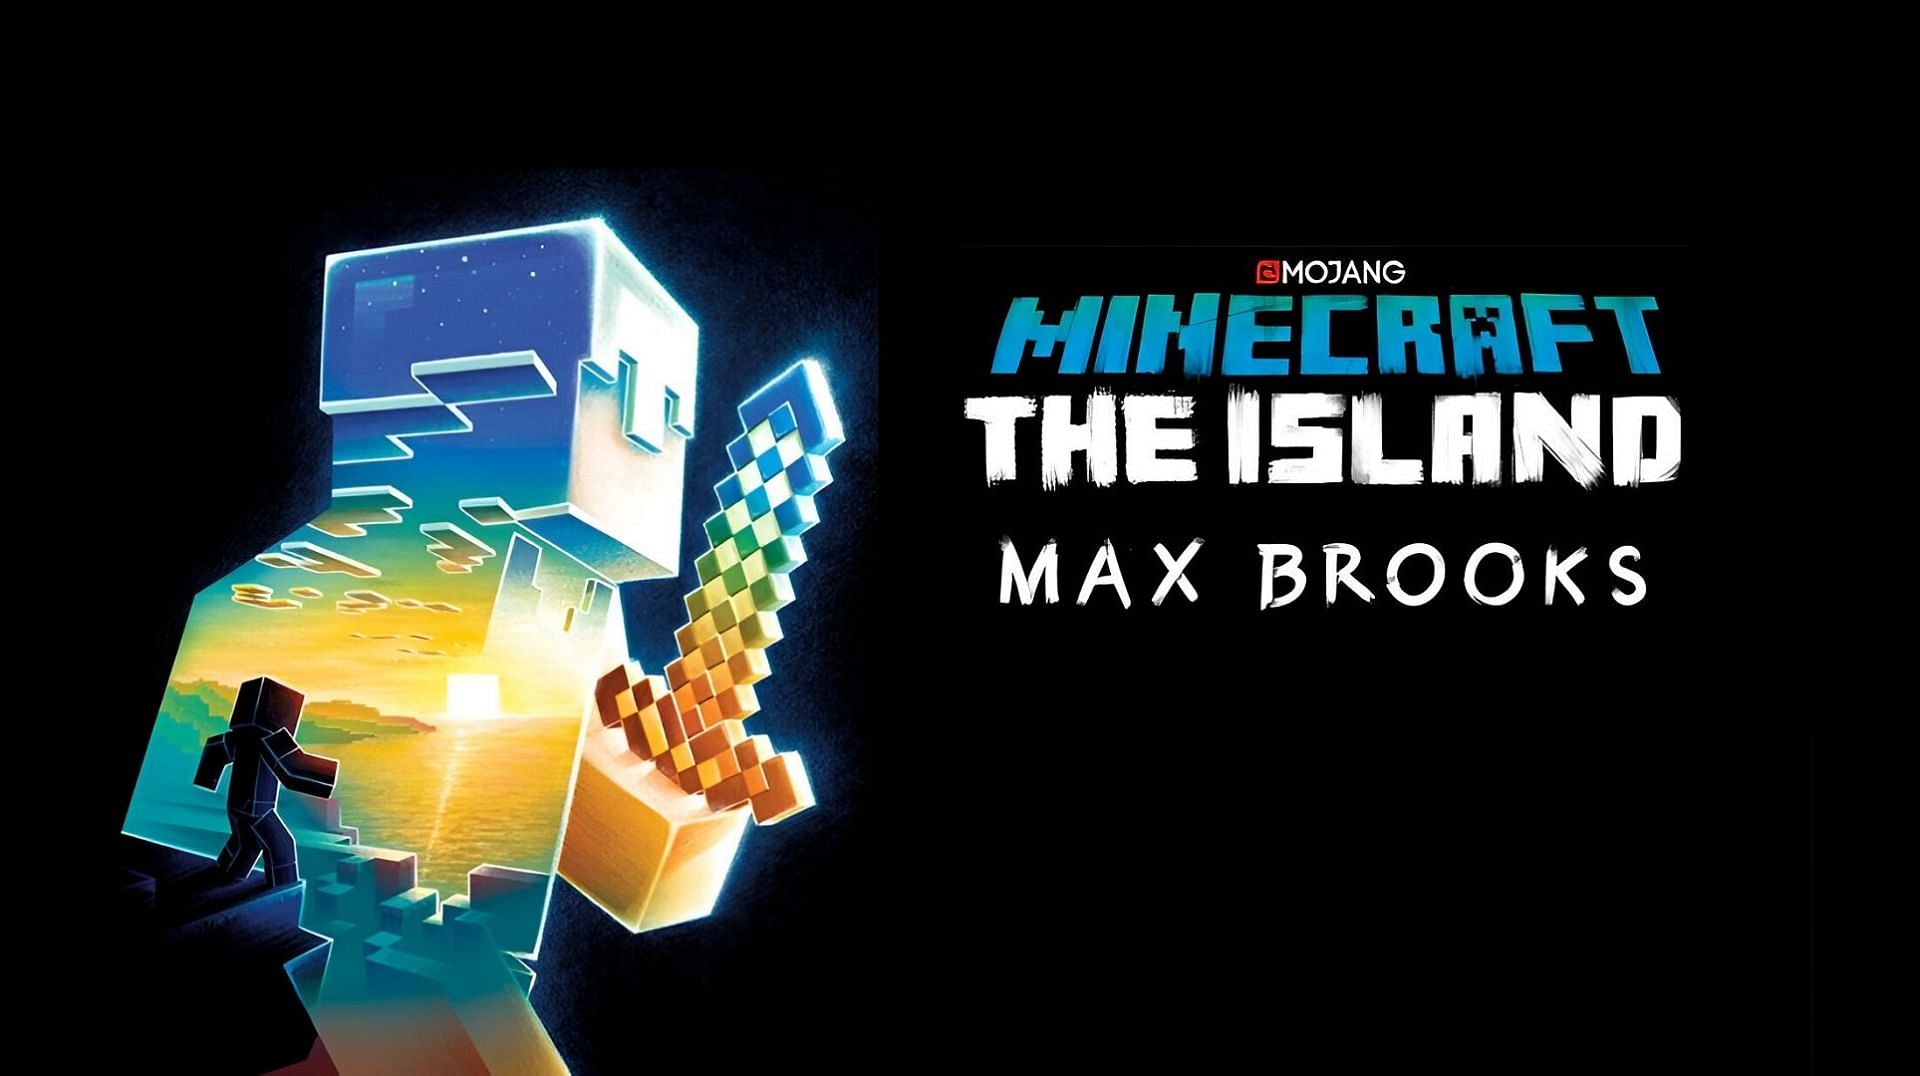 Max Brooks&#039; stories within the Minecraft universe expand the game lore in intriguing ways (Image via Mojang)